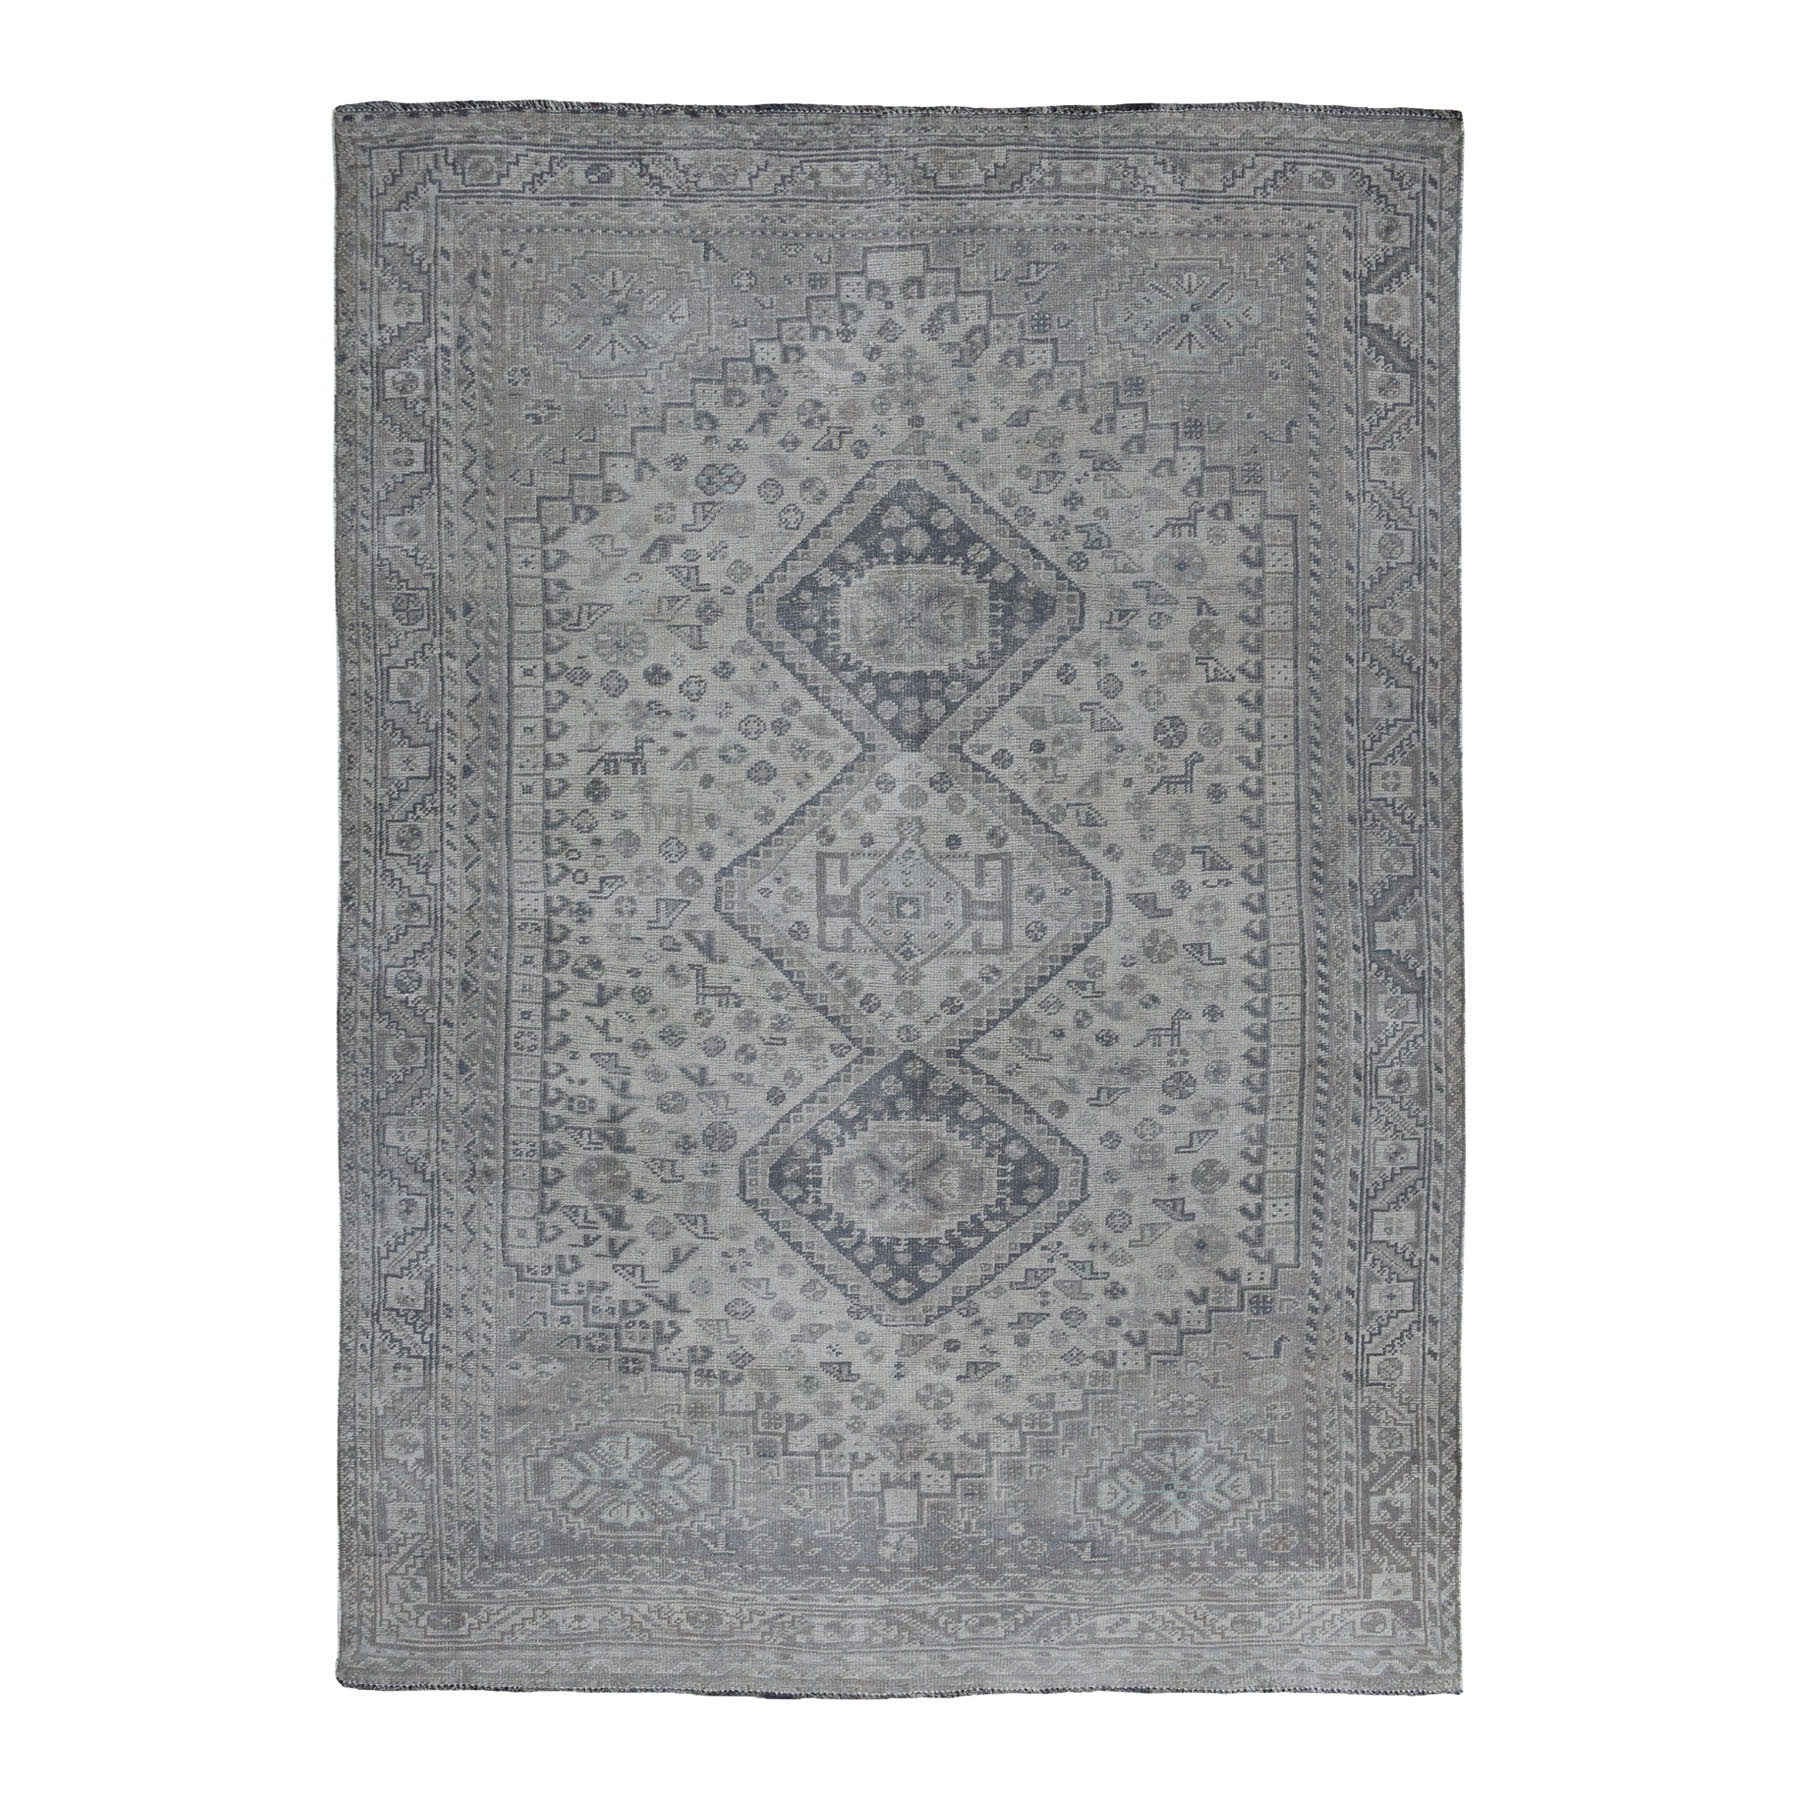 Transitional Wool Hand-Knotted Area Rug 6'10